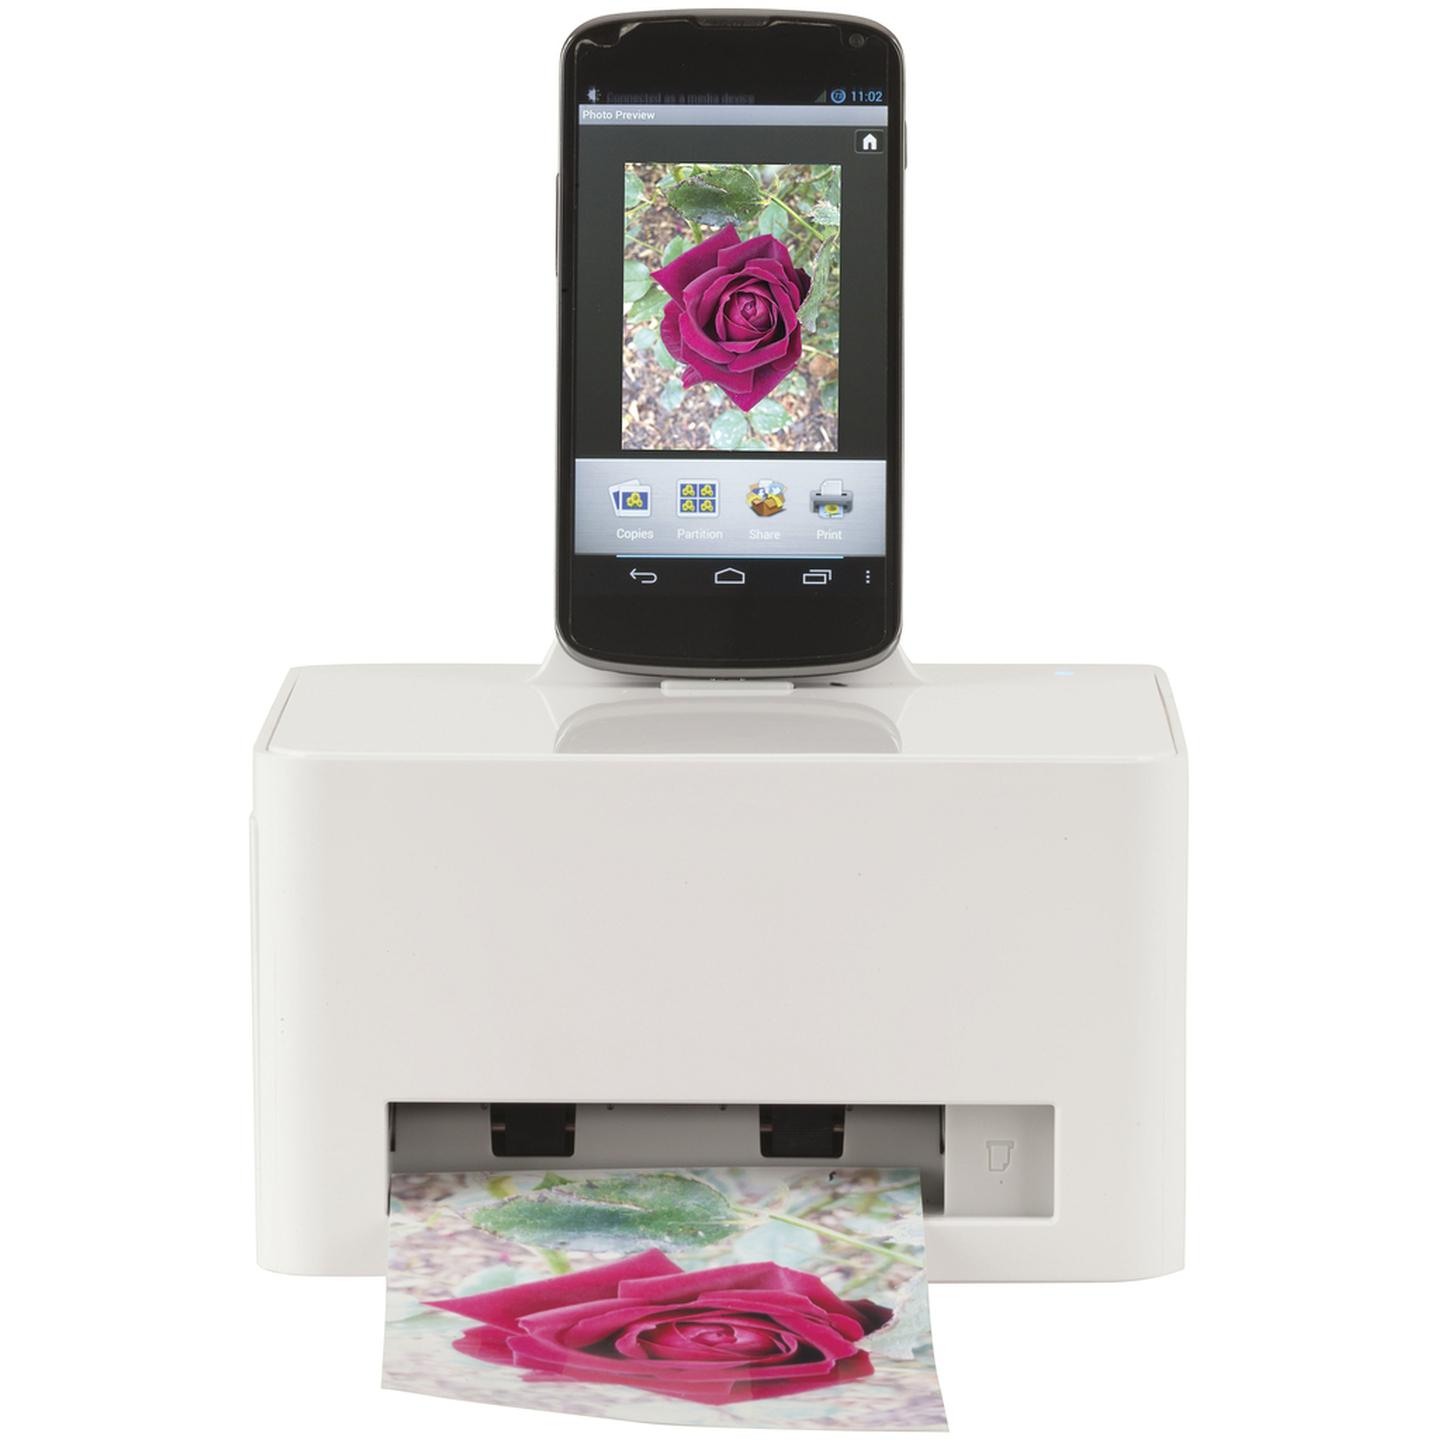 10x15cm Photo Printer for Android Device